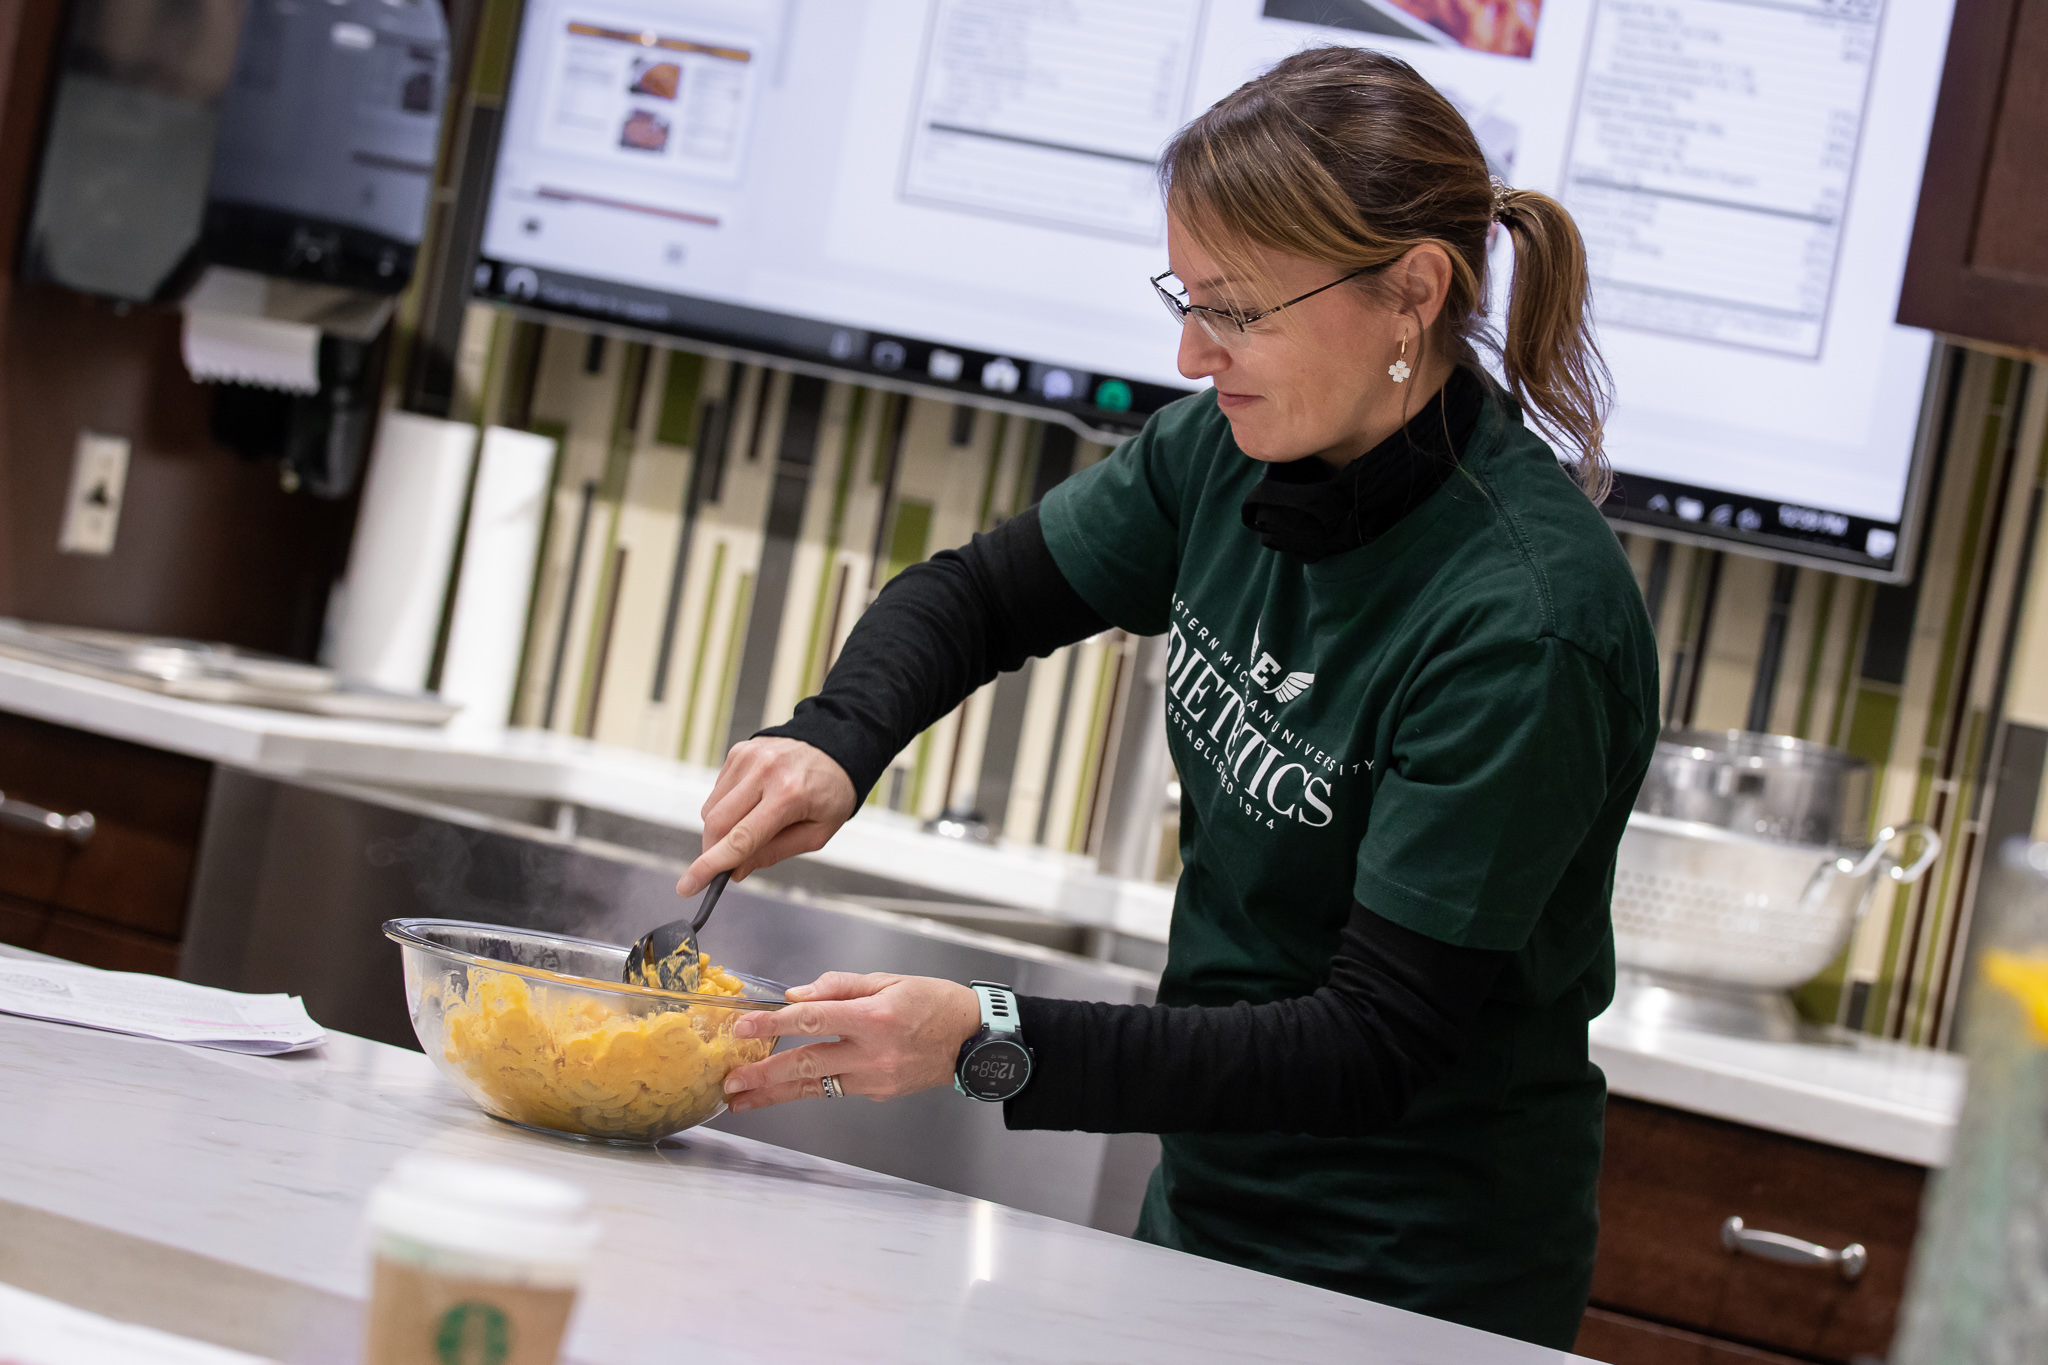 A dietetic student demonstrating a recipe.